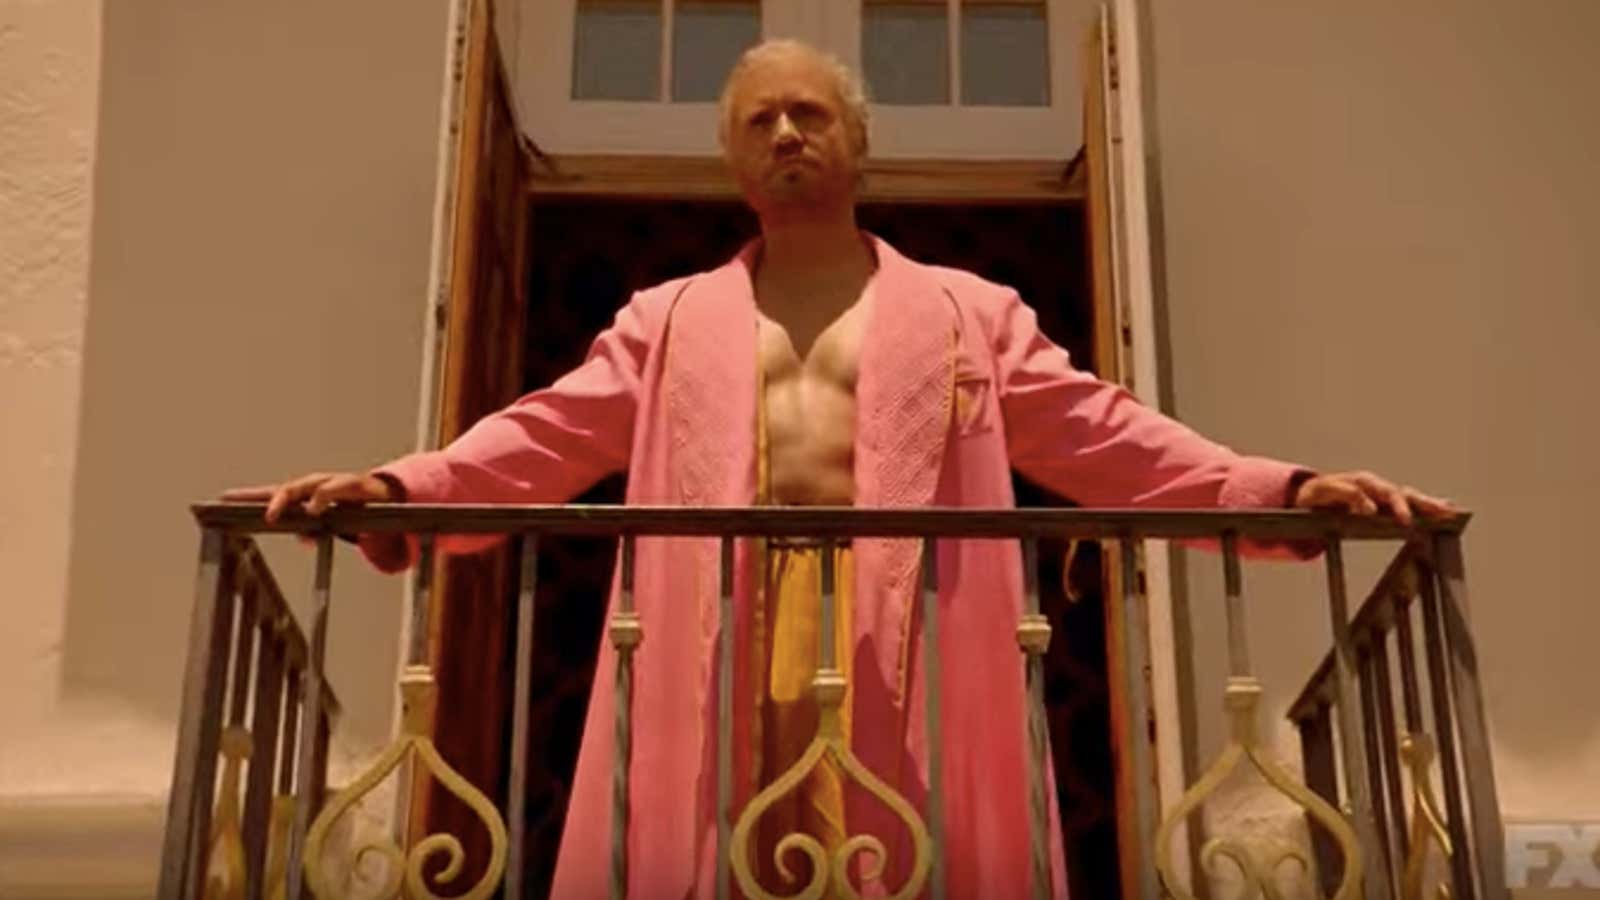 Édgar Ramírez as Gianni Versace in “Assassination of Gianni Versace: American Crime Story.”